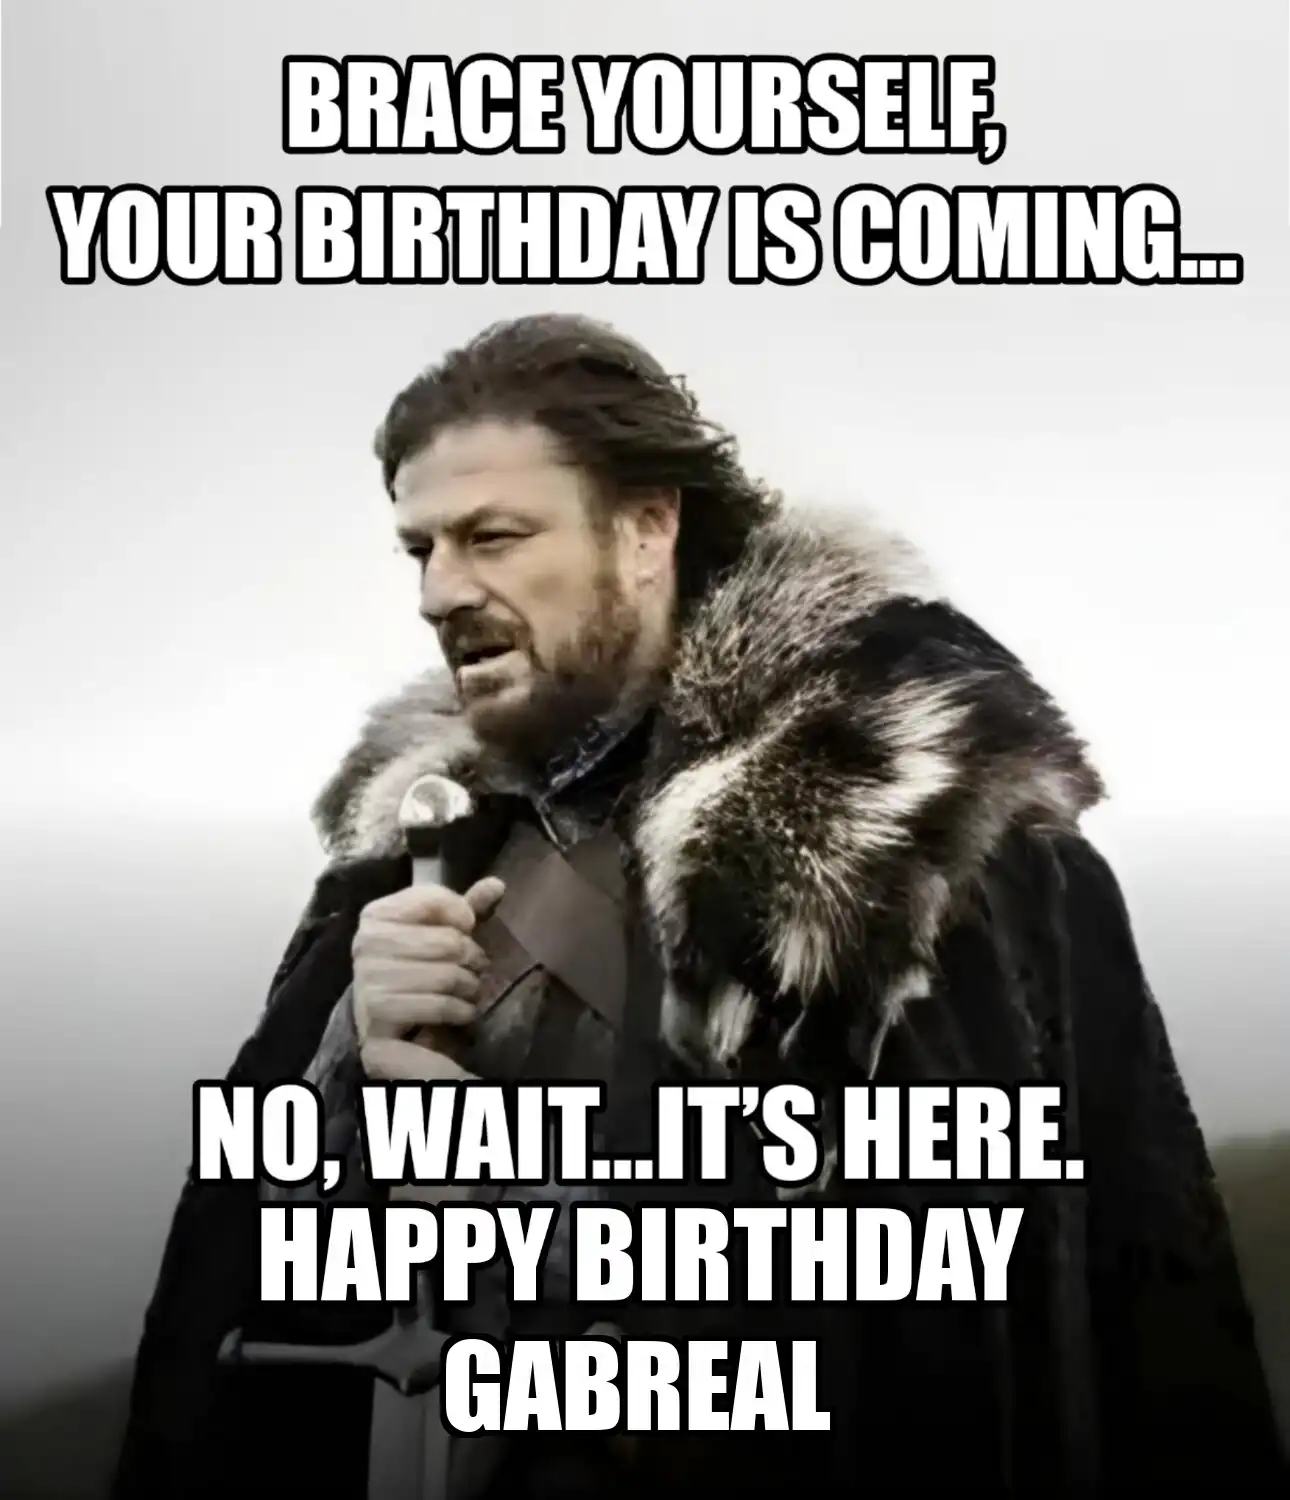 Happy Birthday Gabreal Brace Yourself Your Birthday Is Coming Meme